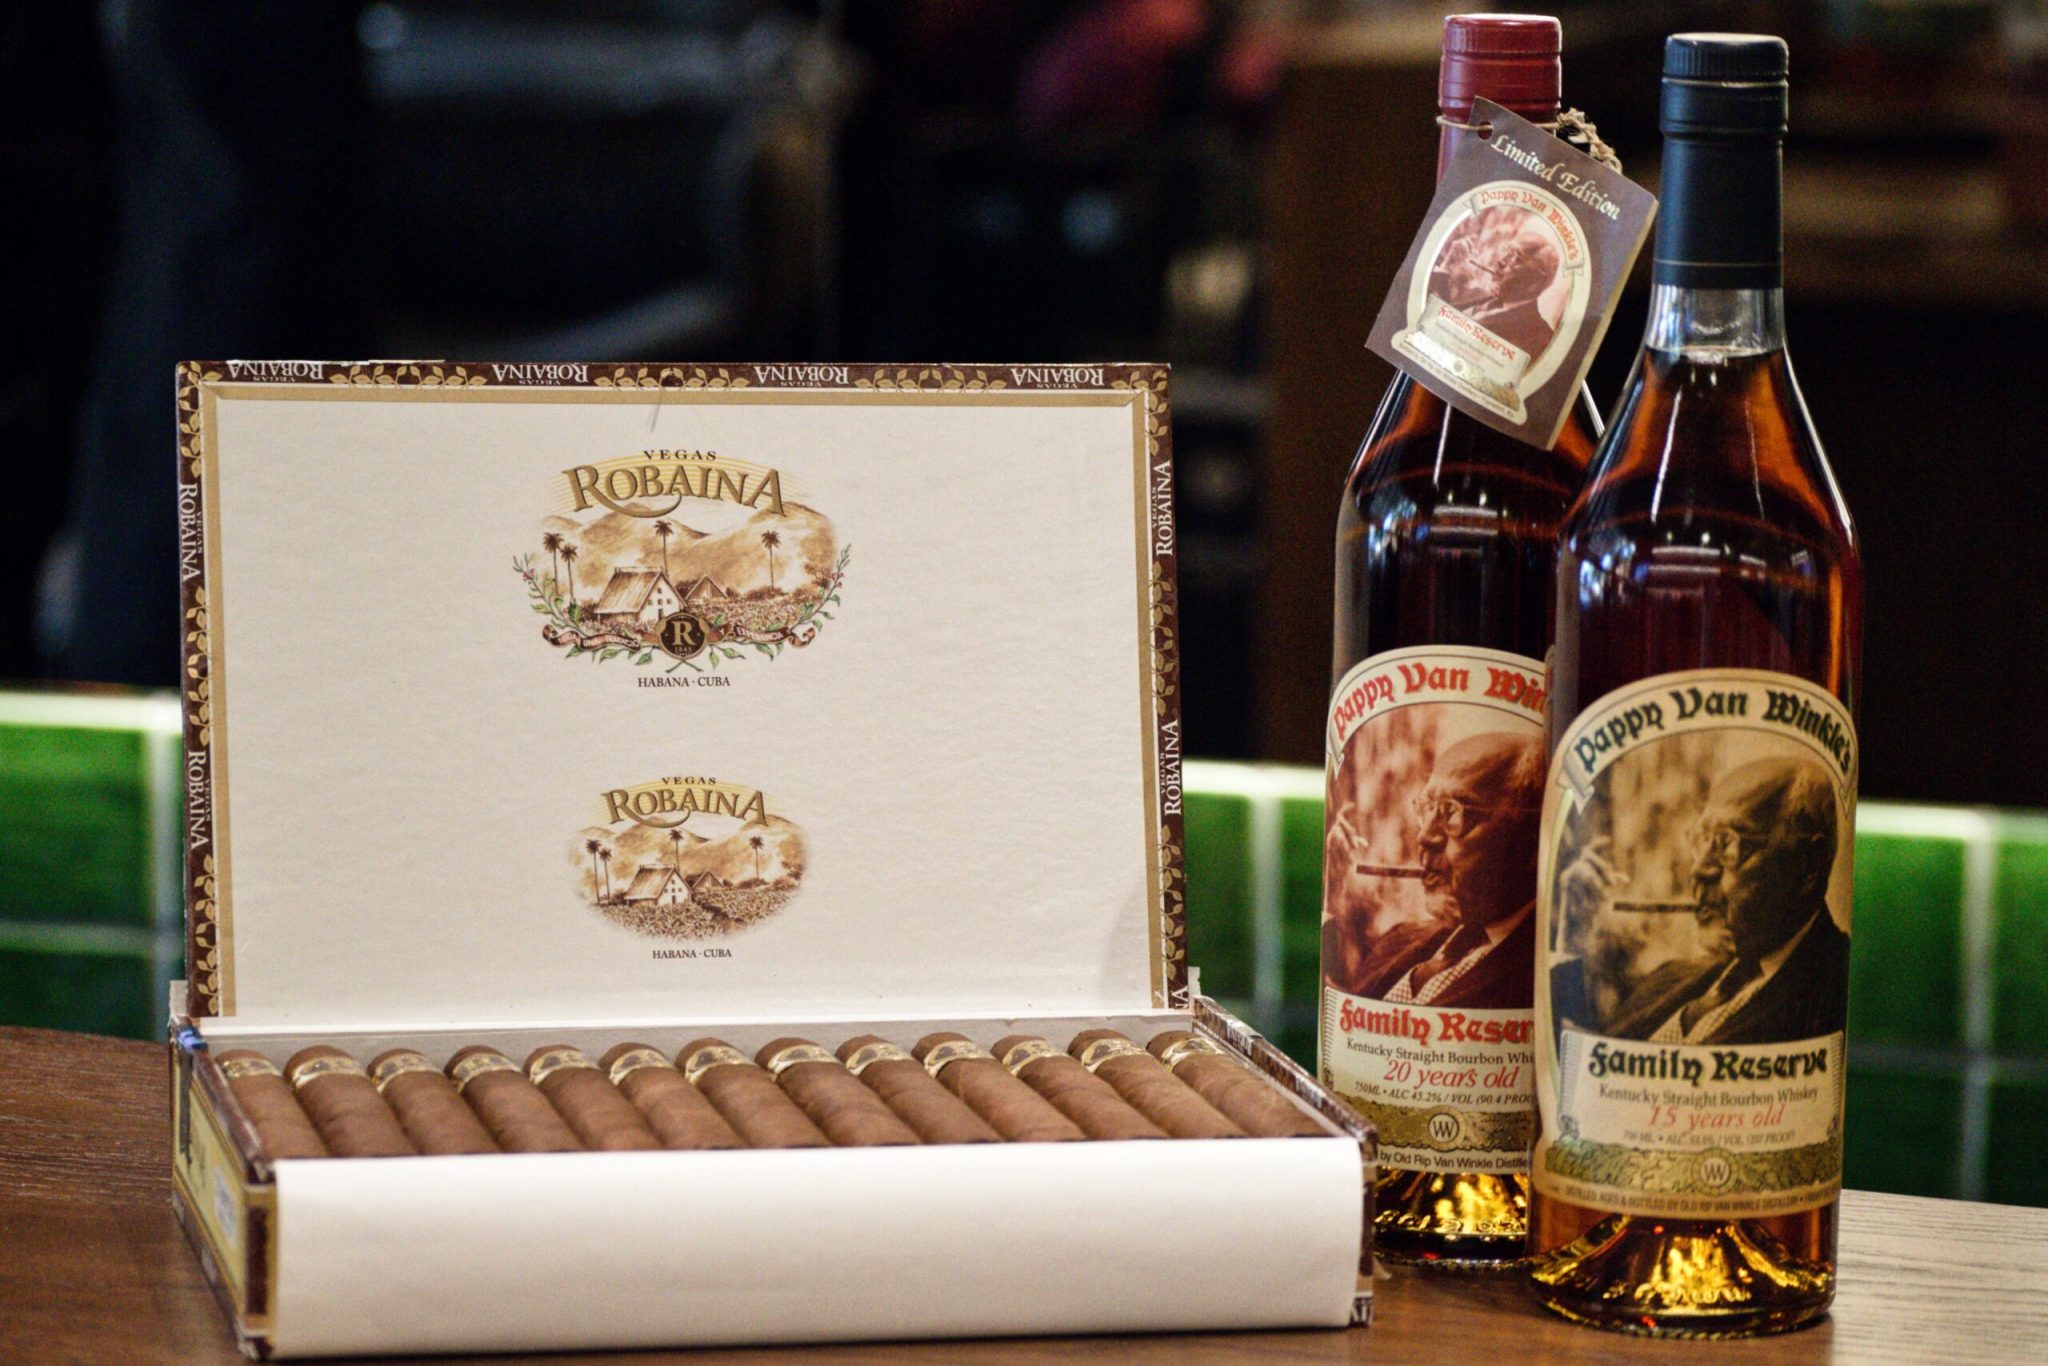 Pappy van Winkle and a Robaina Cuban handmade cigar by Teddy's Speakeasy